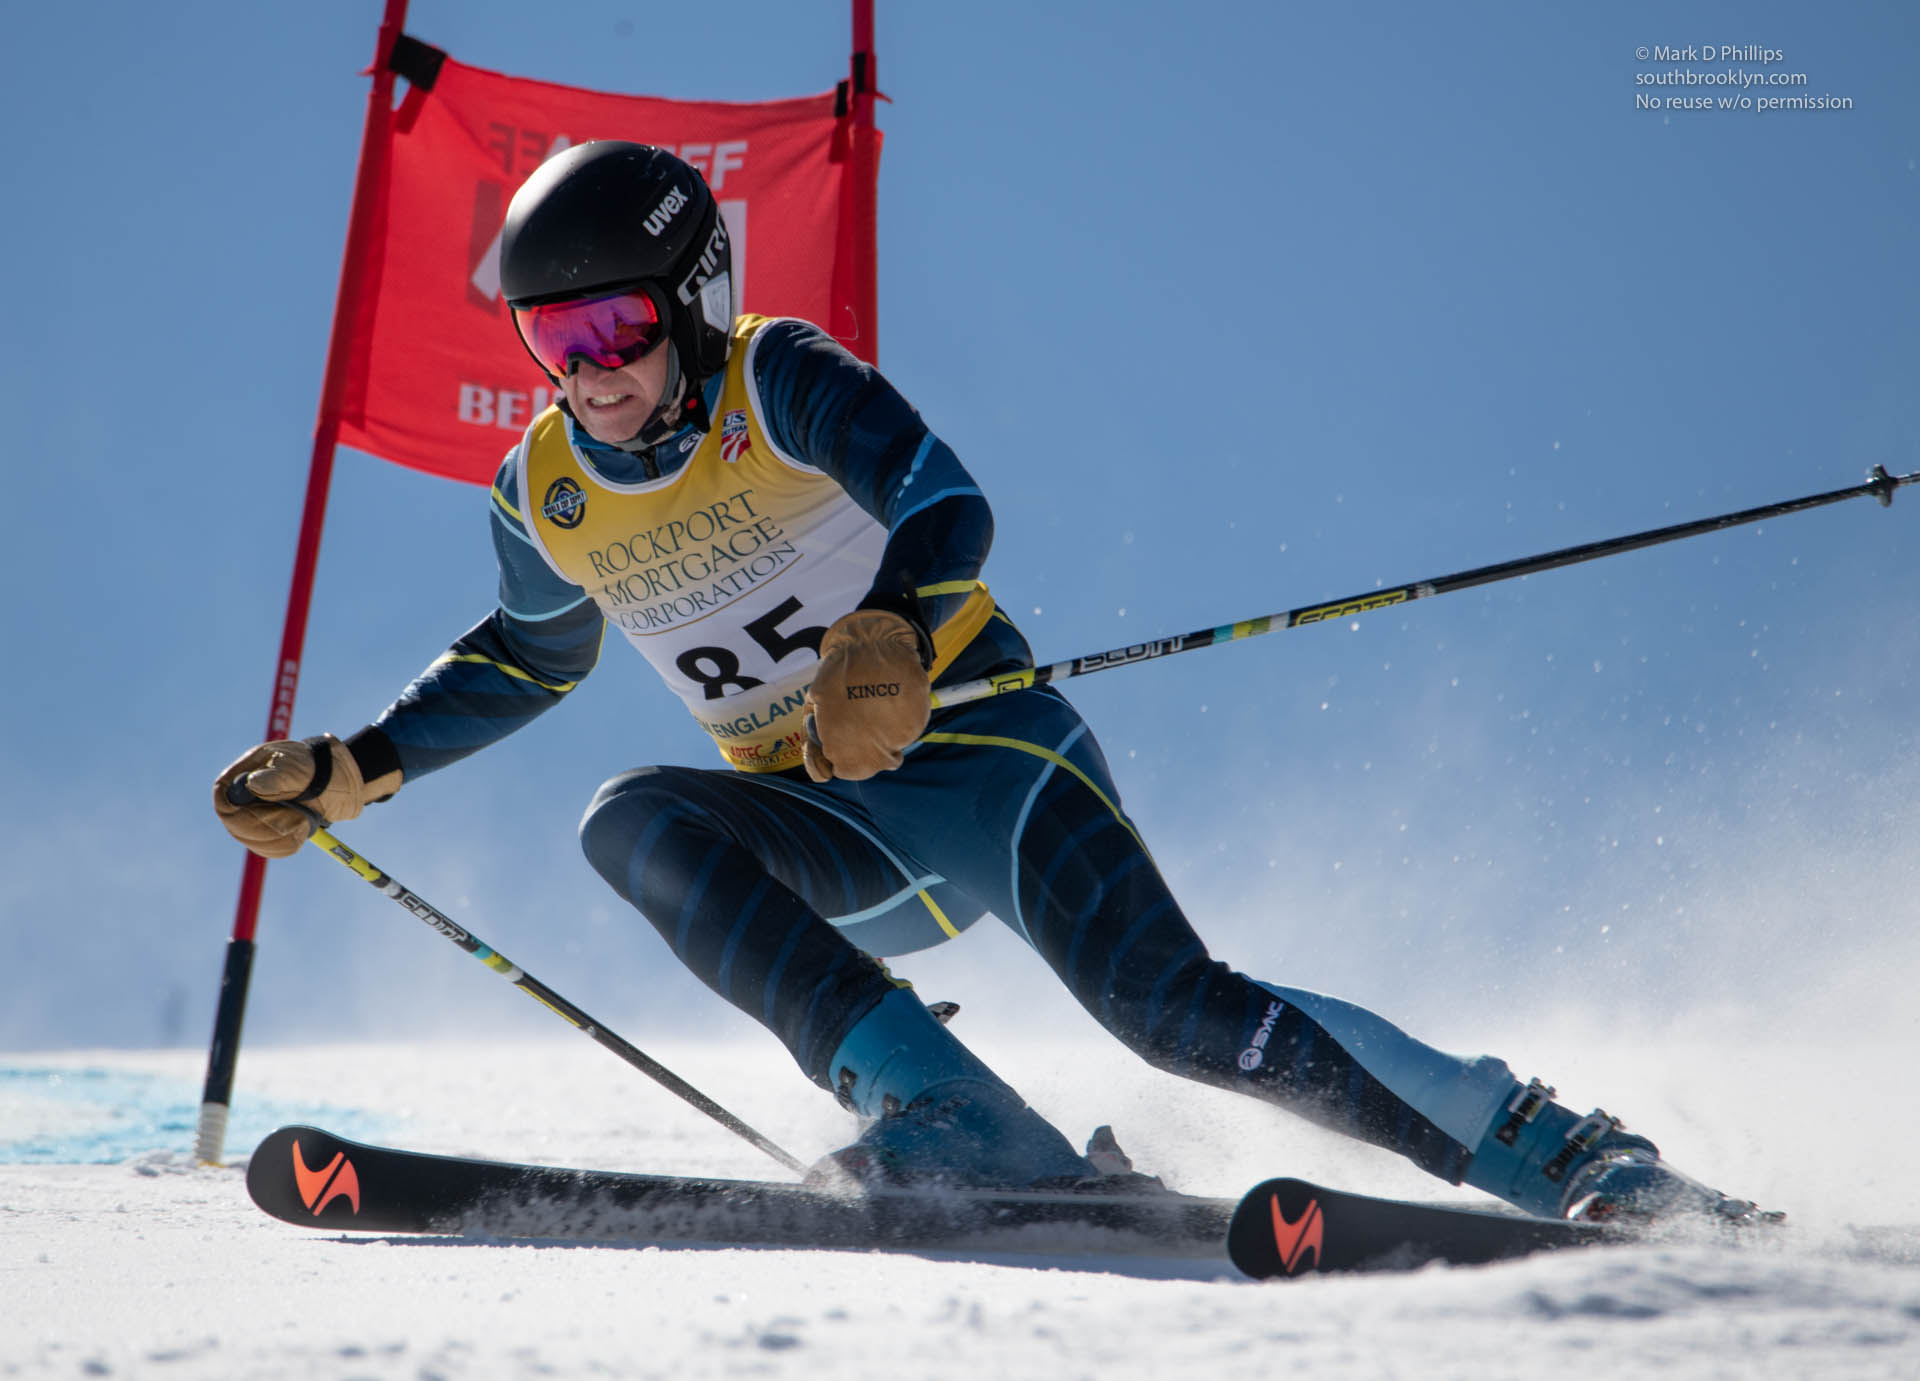 John Rannestad races the course during the Masters GS on Sunday, March 7, 2021, at Belleayre Ski Area in New York. ©Mark D Phillips